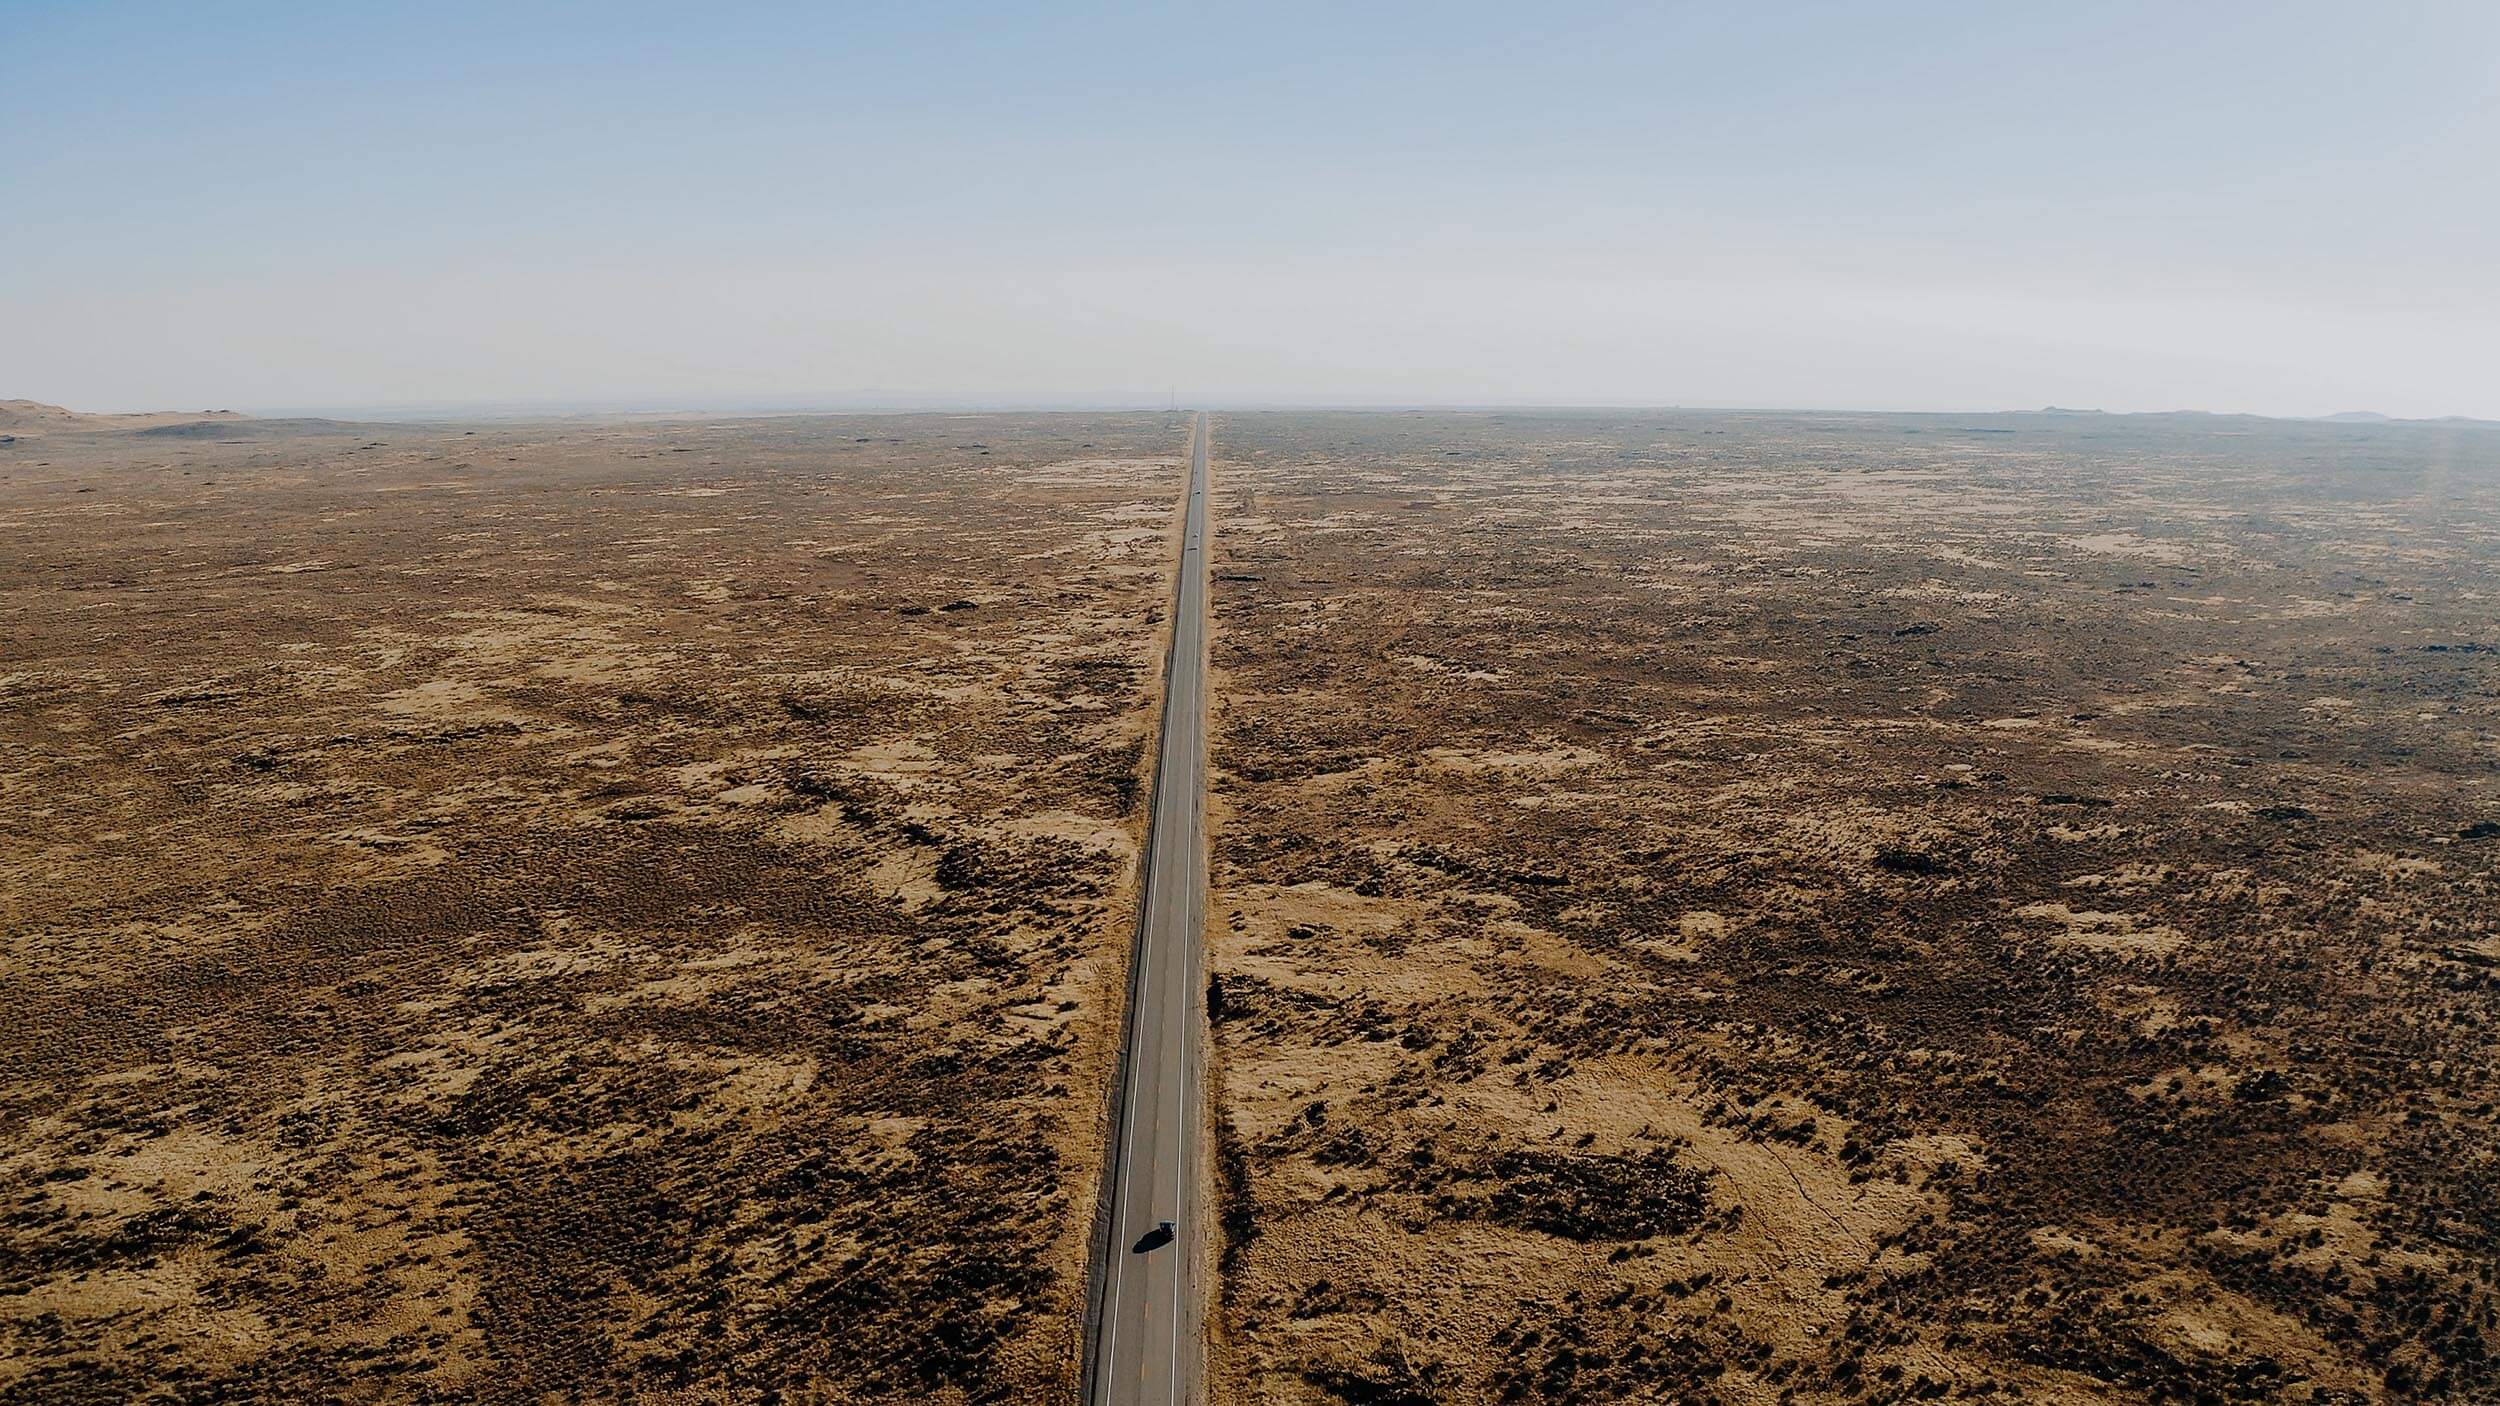 overhead view of a straight highway crossing through a desert landscape